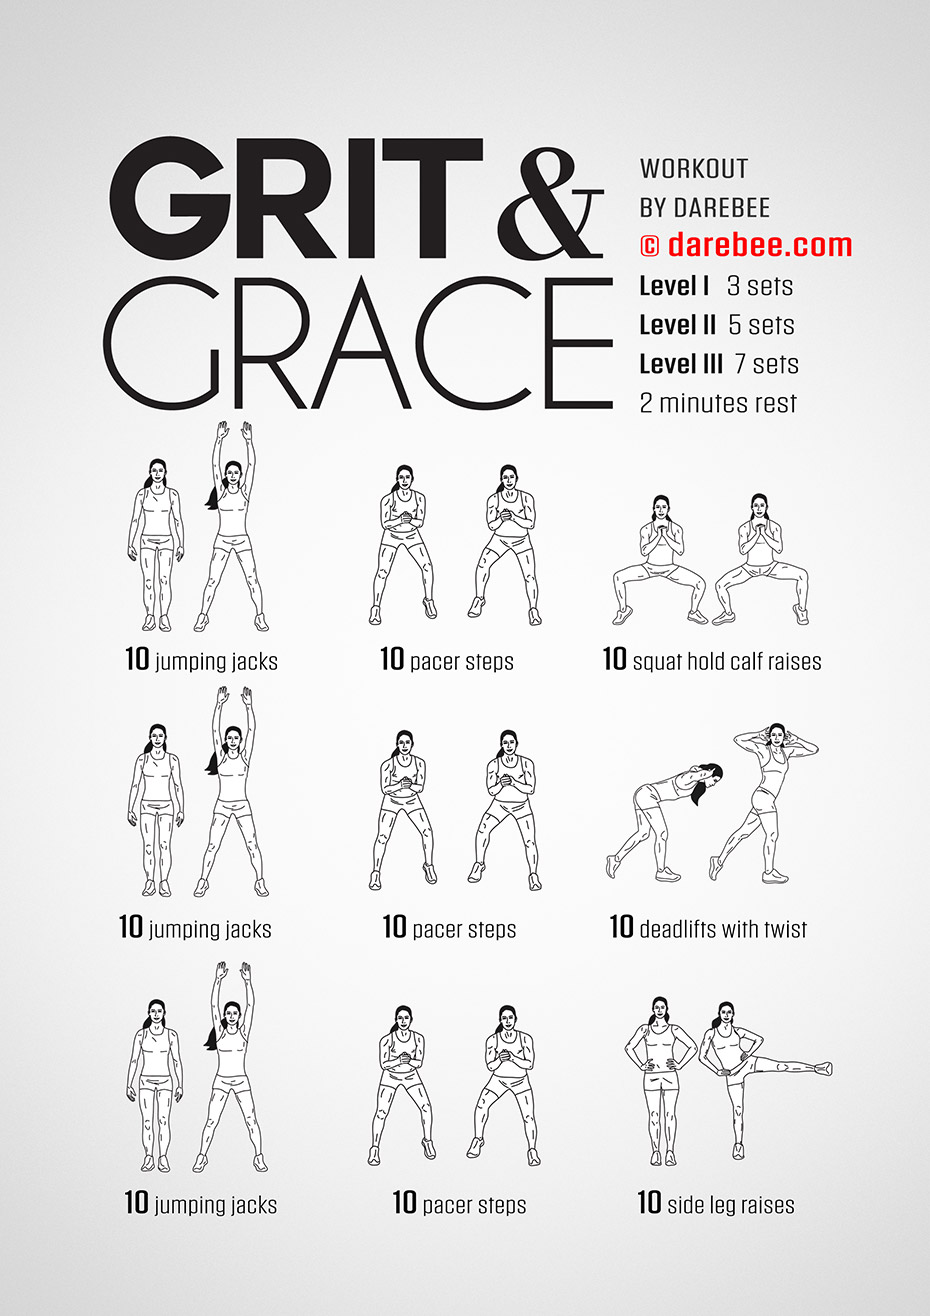 grit workout > OFF-56%